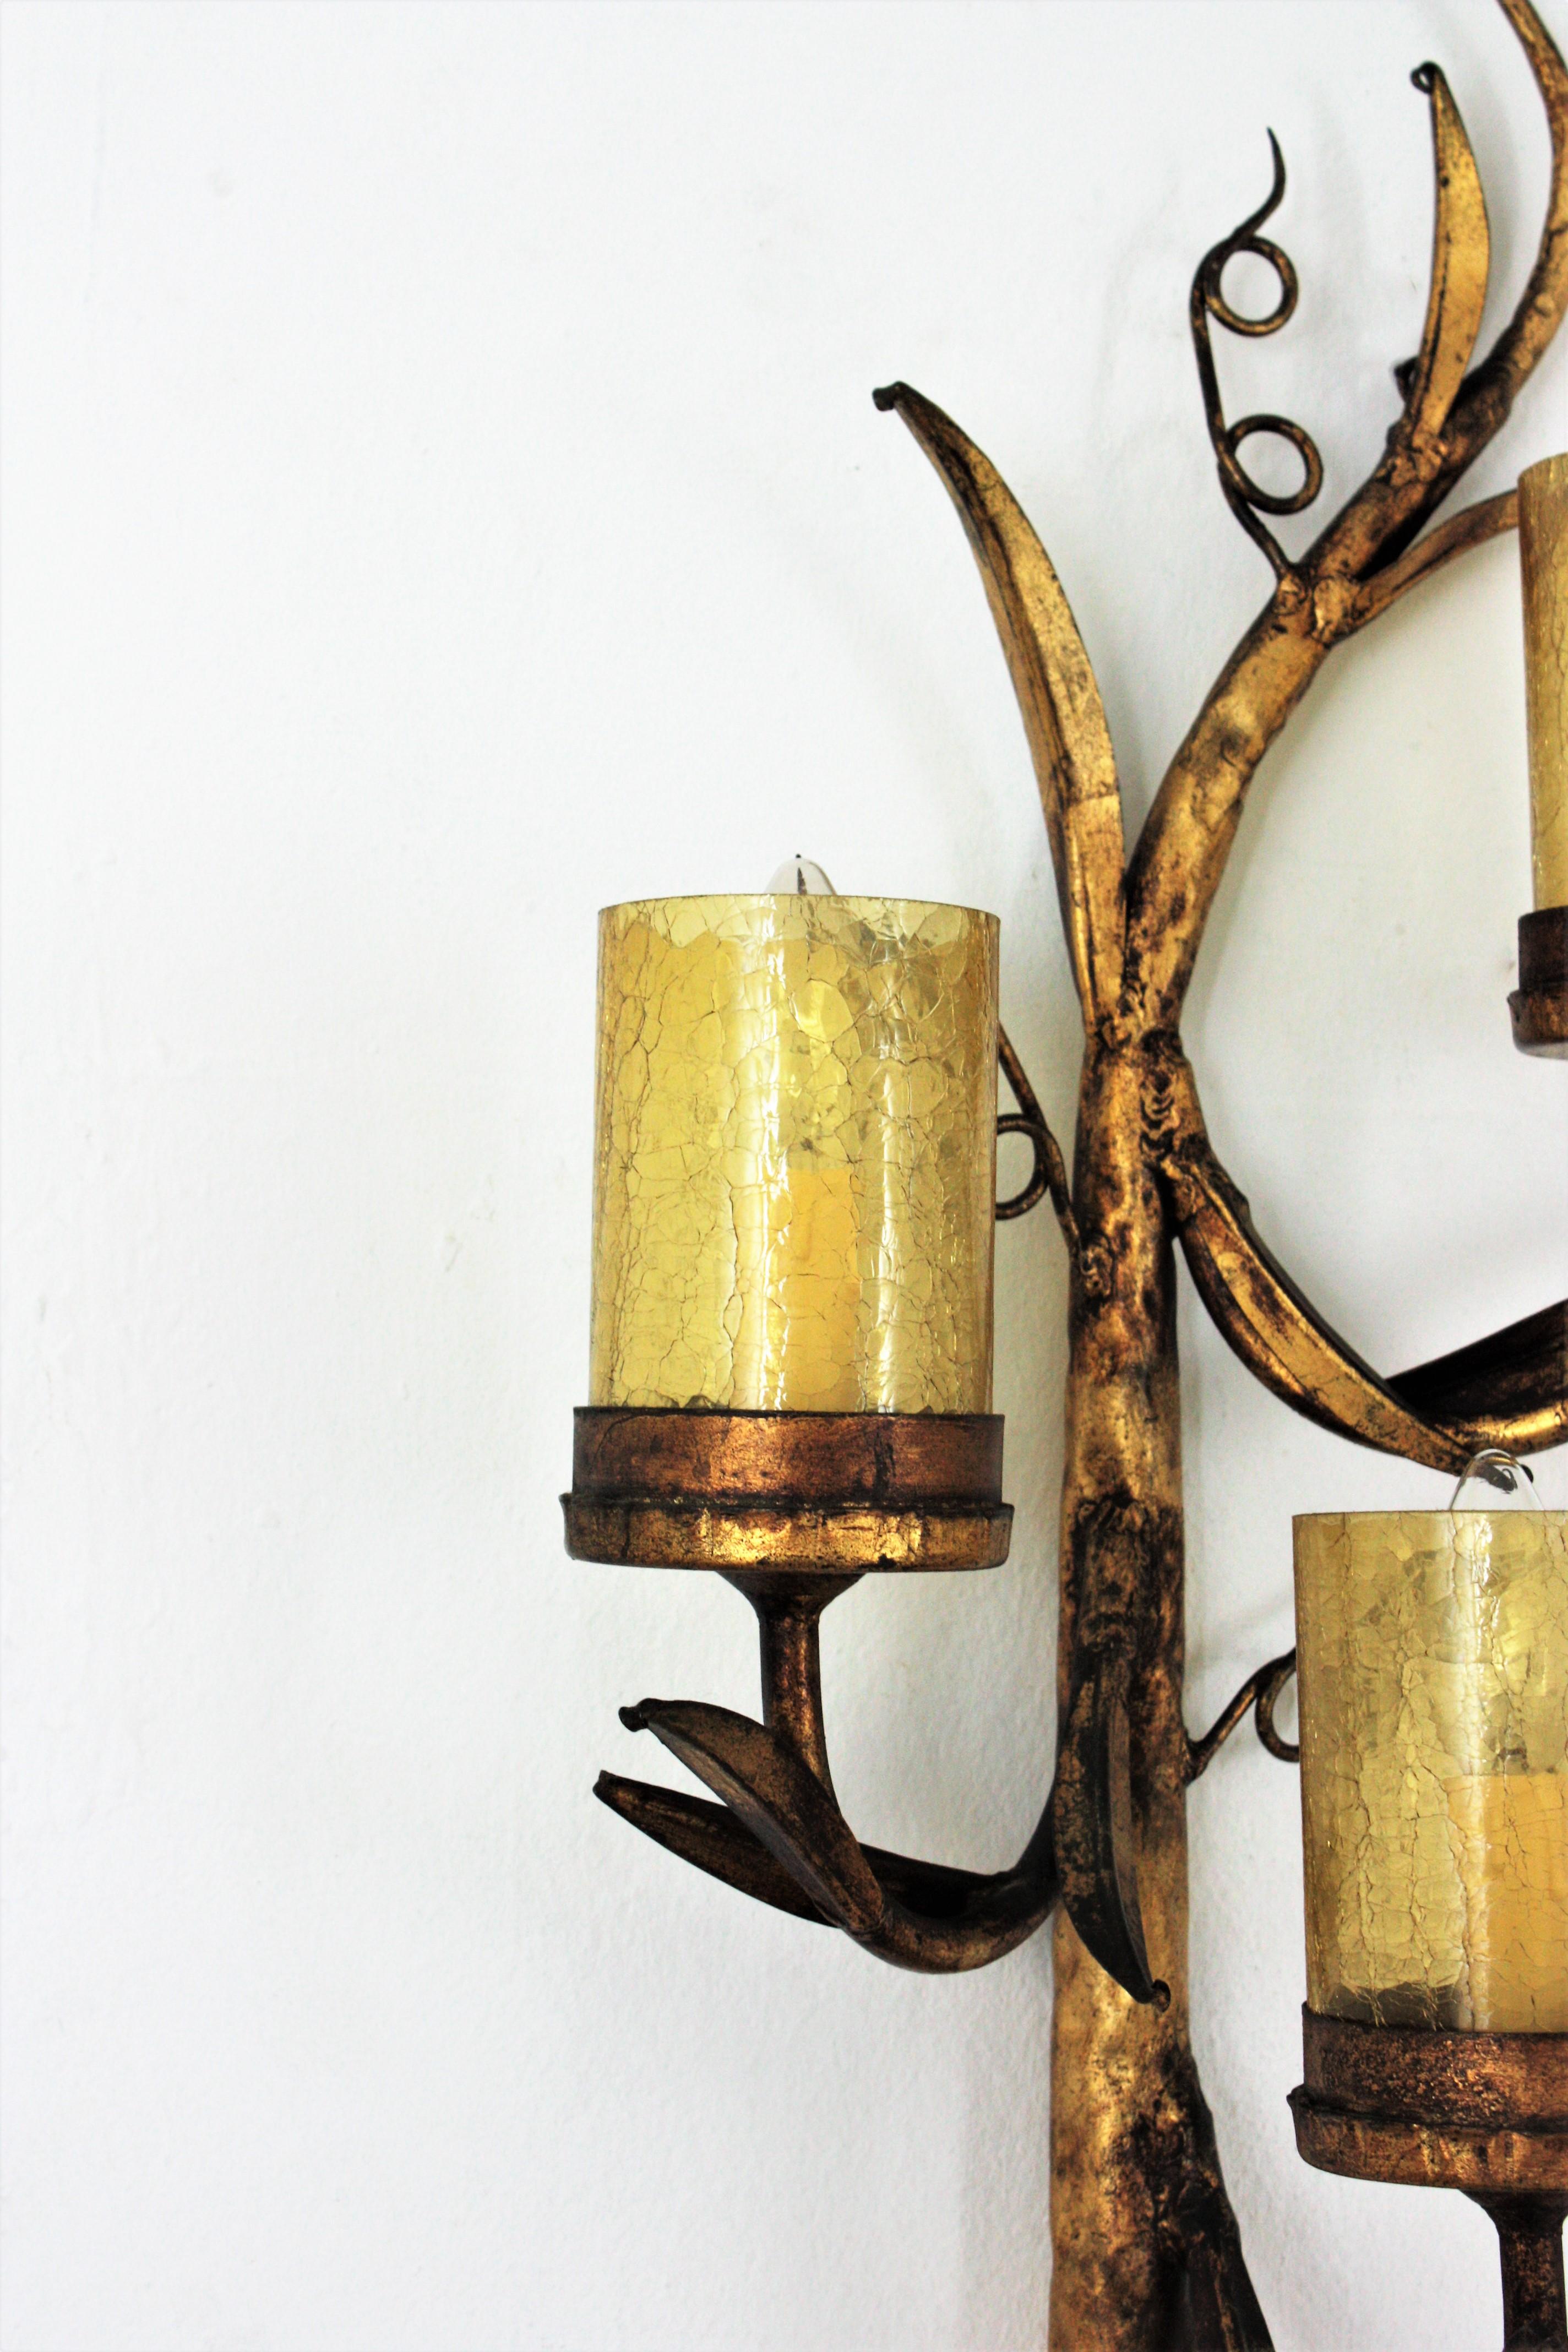 Spanish Branch Wall Sconce in Gilt Iron and Amber Cracked Glass, 1950s For Sale 3